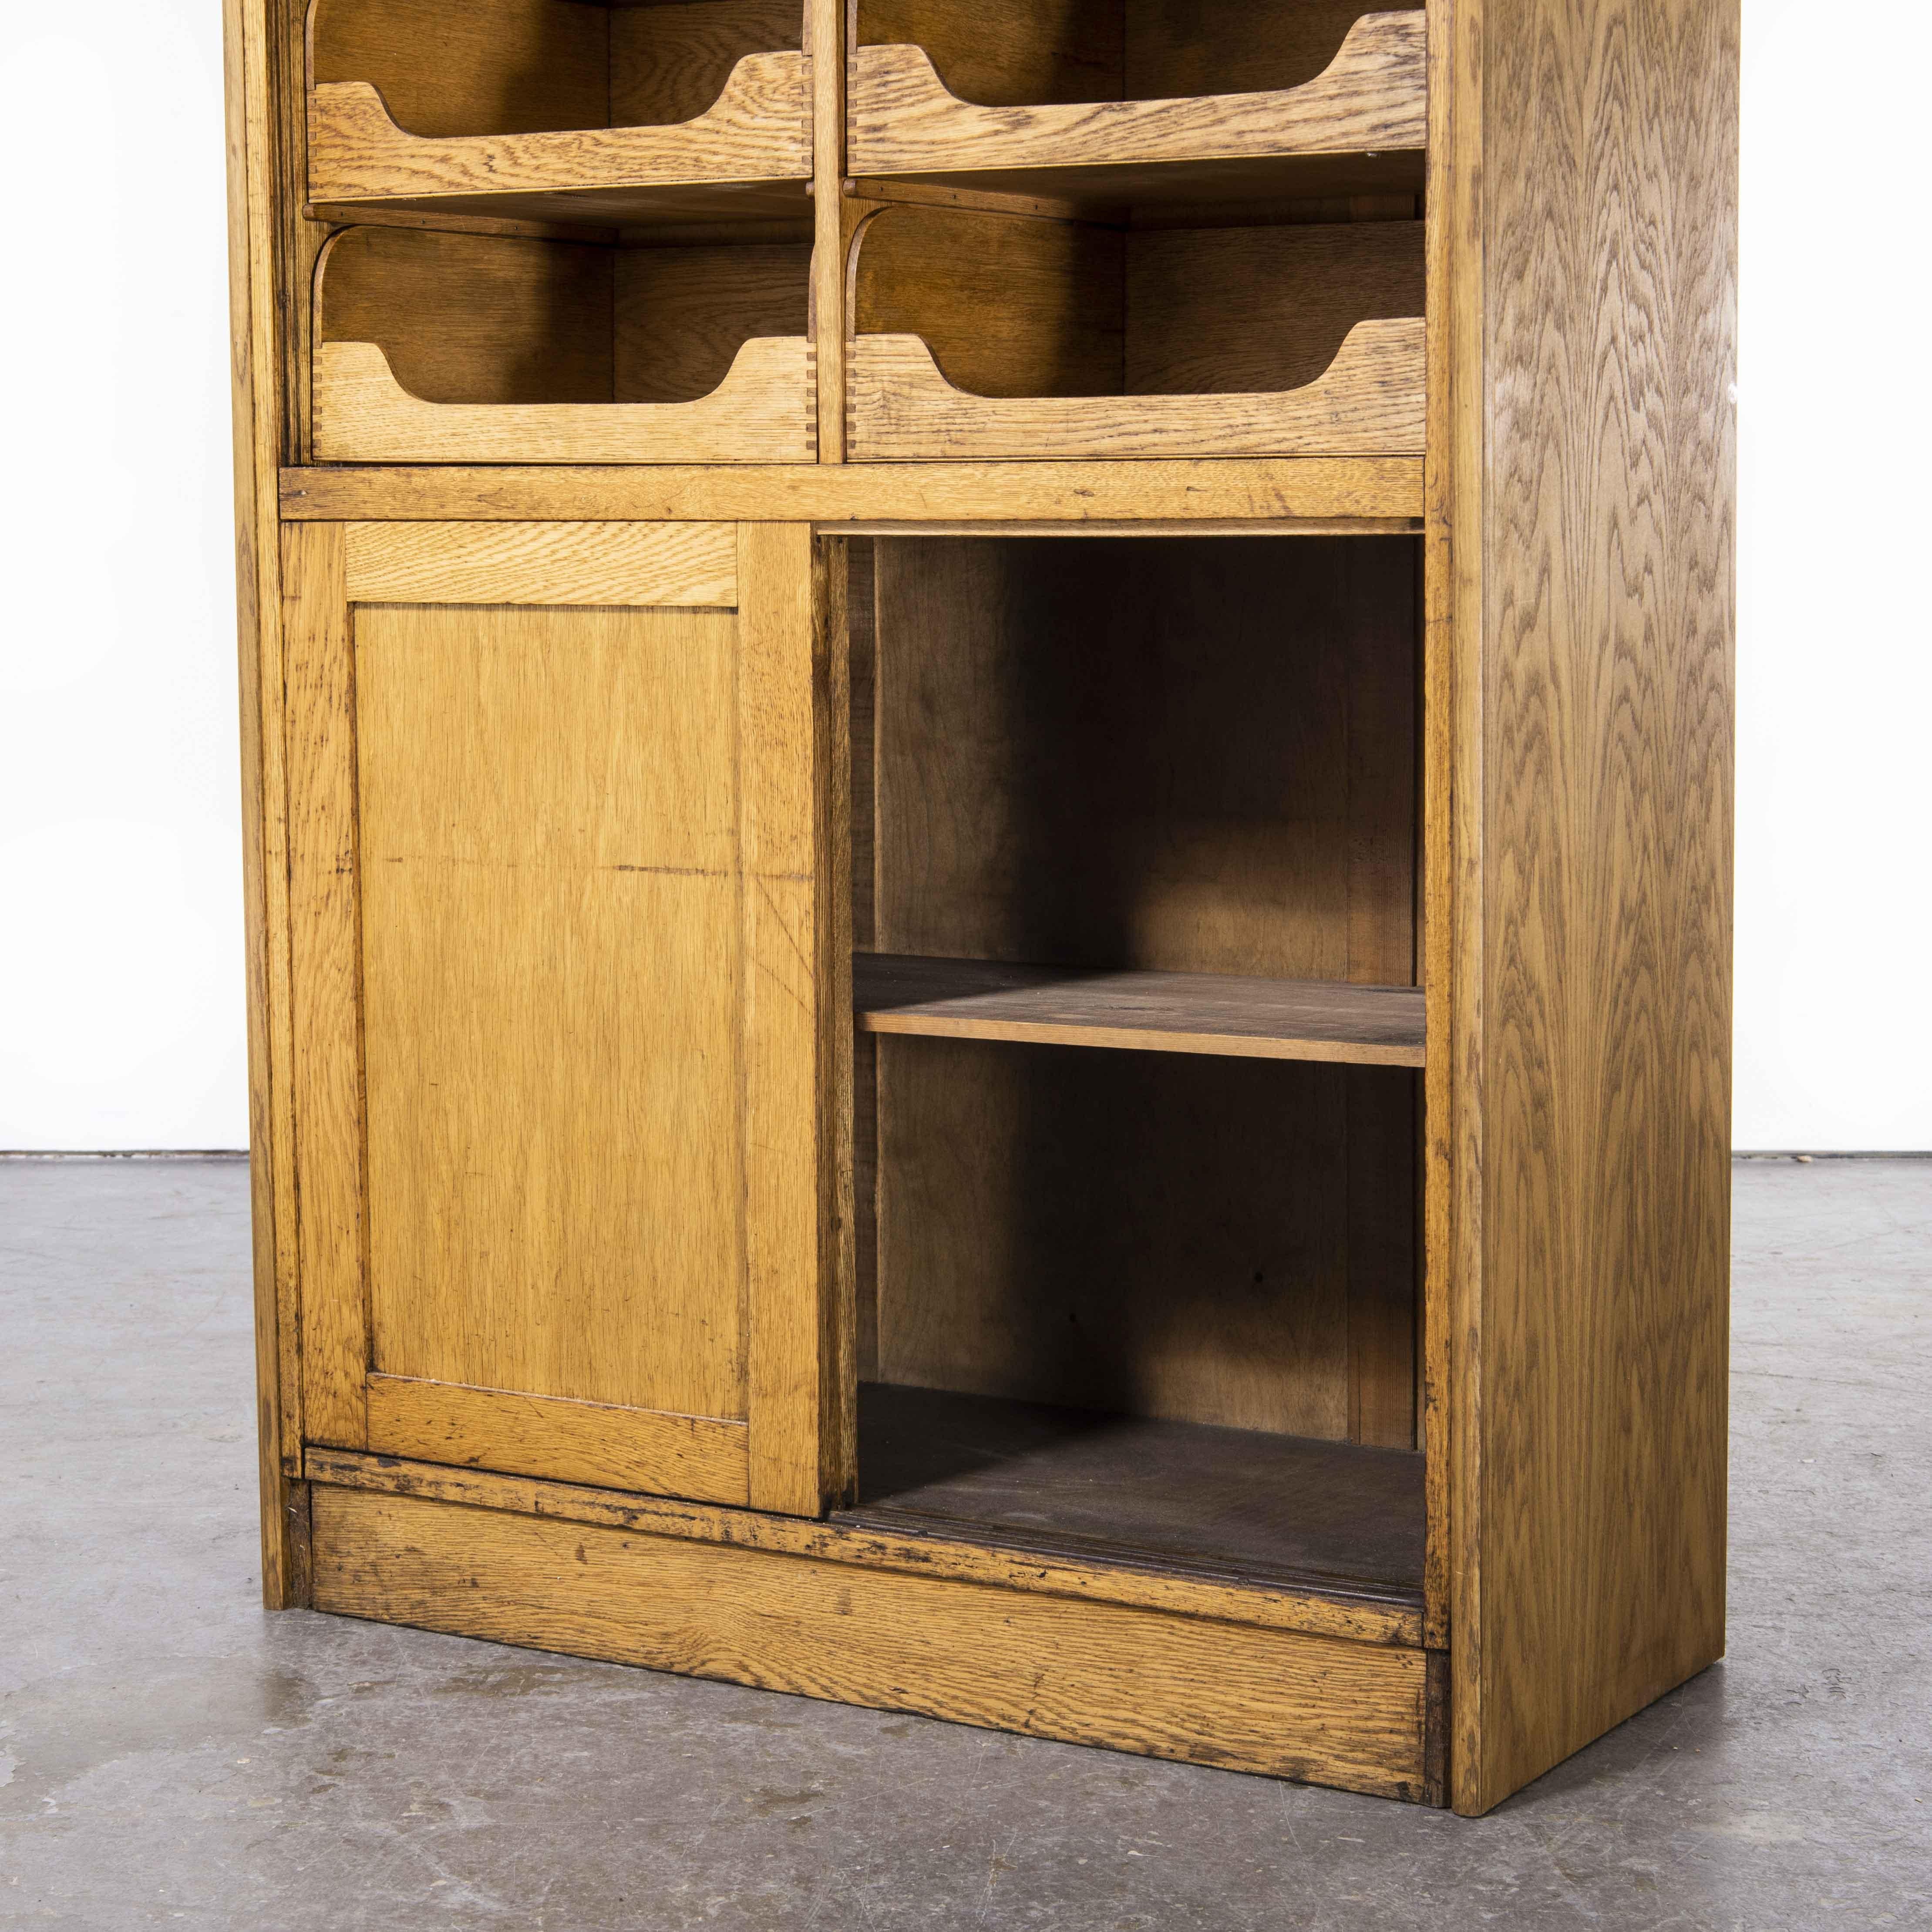 1950's Tall English Haberdashery Shelved Cabinet, Sixteen Drawers 'Model 1244.1' For Sale 1